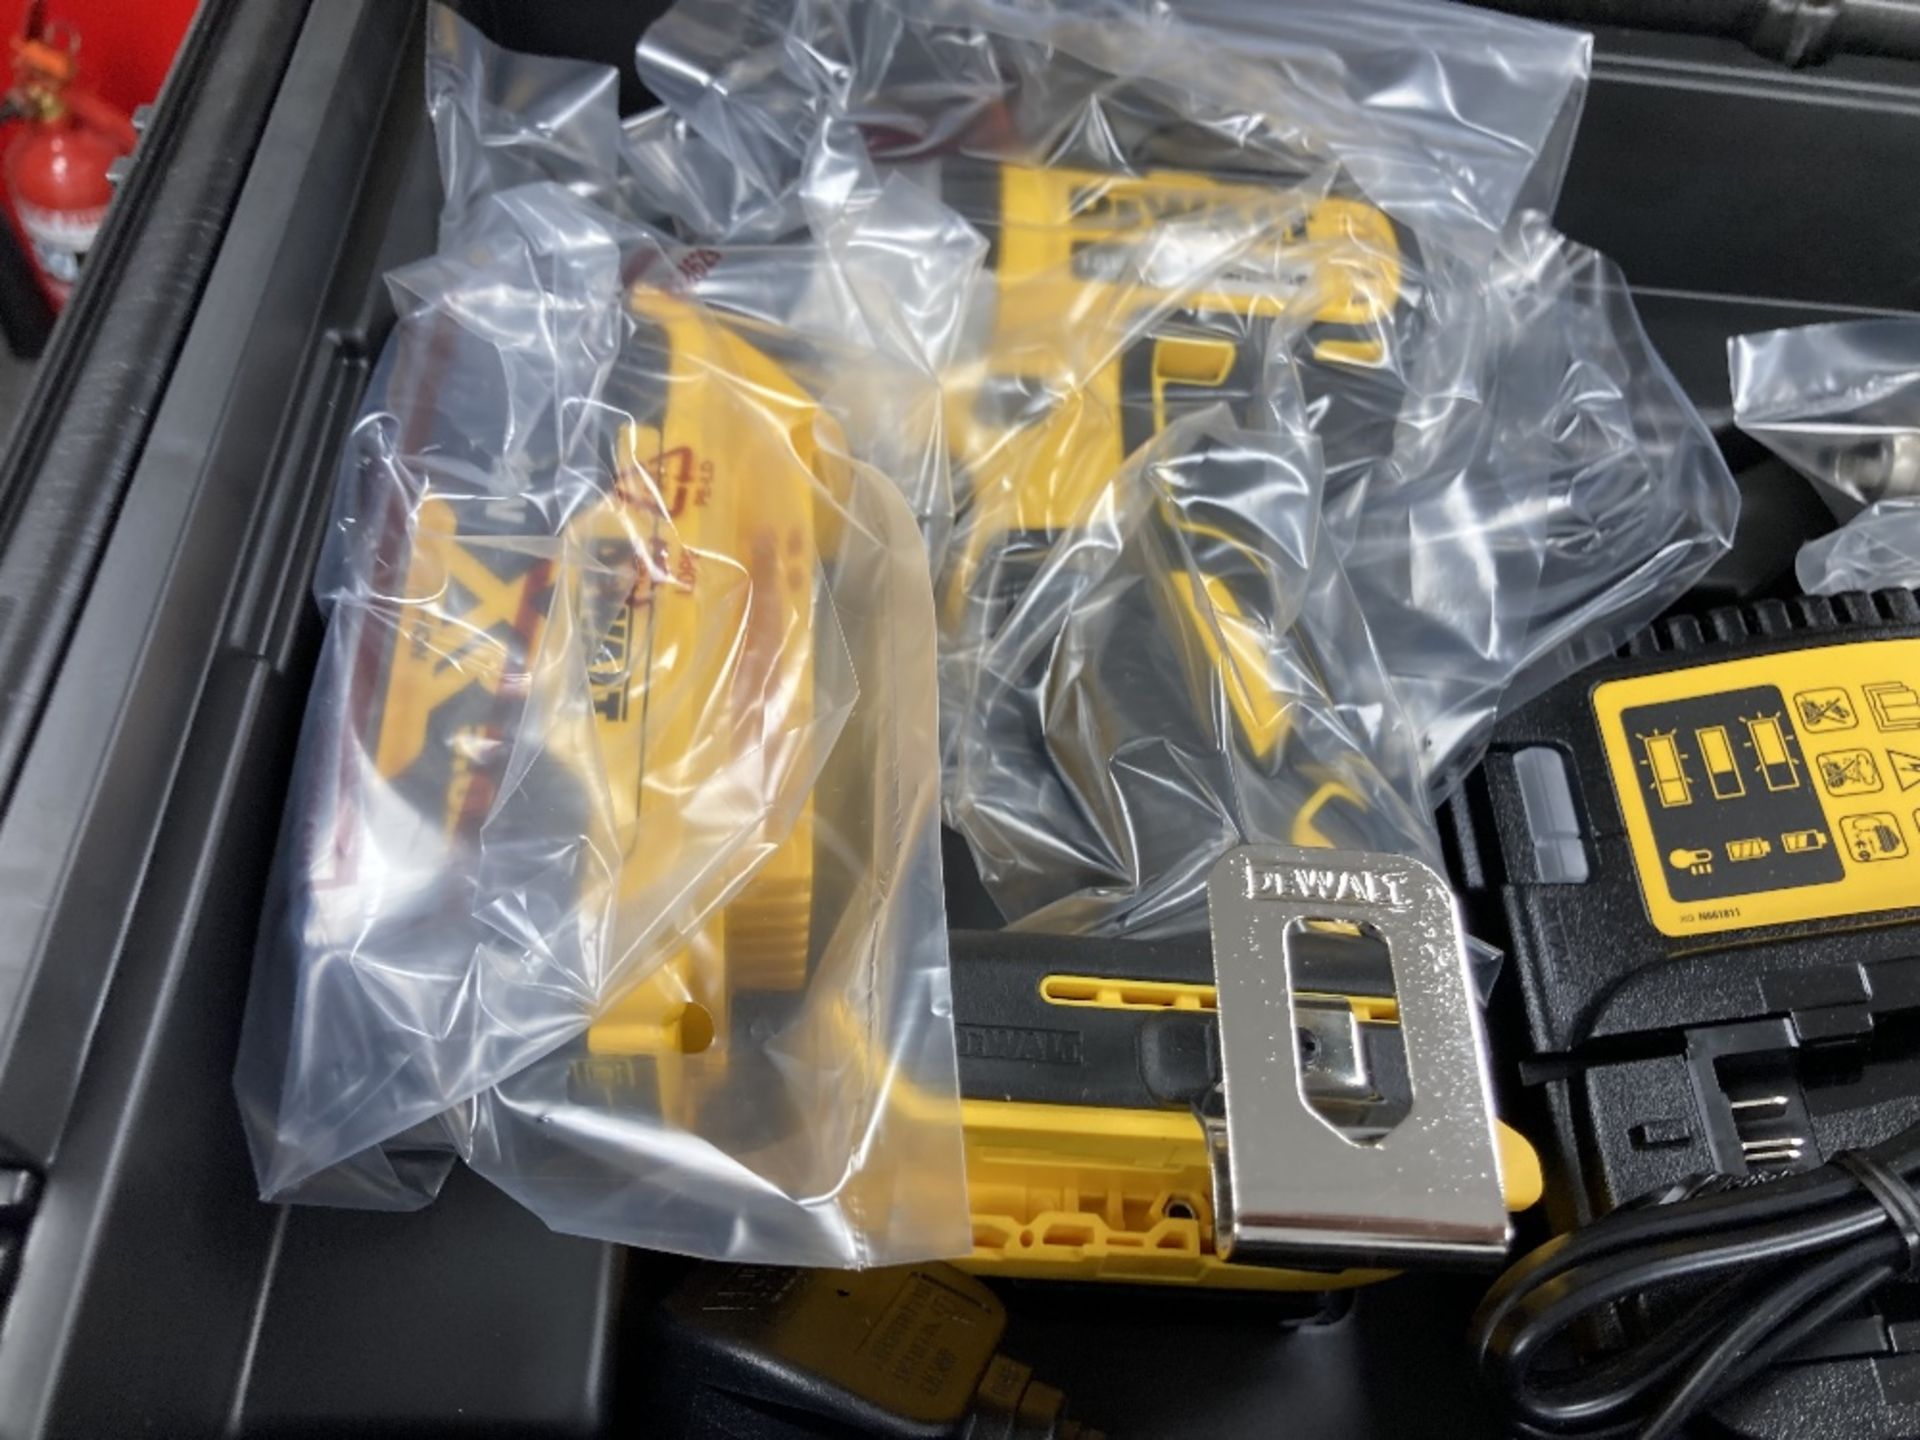 DeWalt DCK266P2-GB 18V XR Brushless Combi Drill & Impact Driver Twin Kit with 2x 5.0Ah Batteries - Image 5 of 7